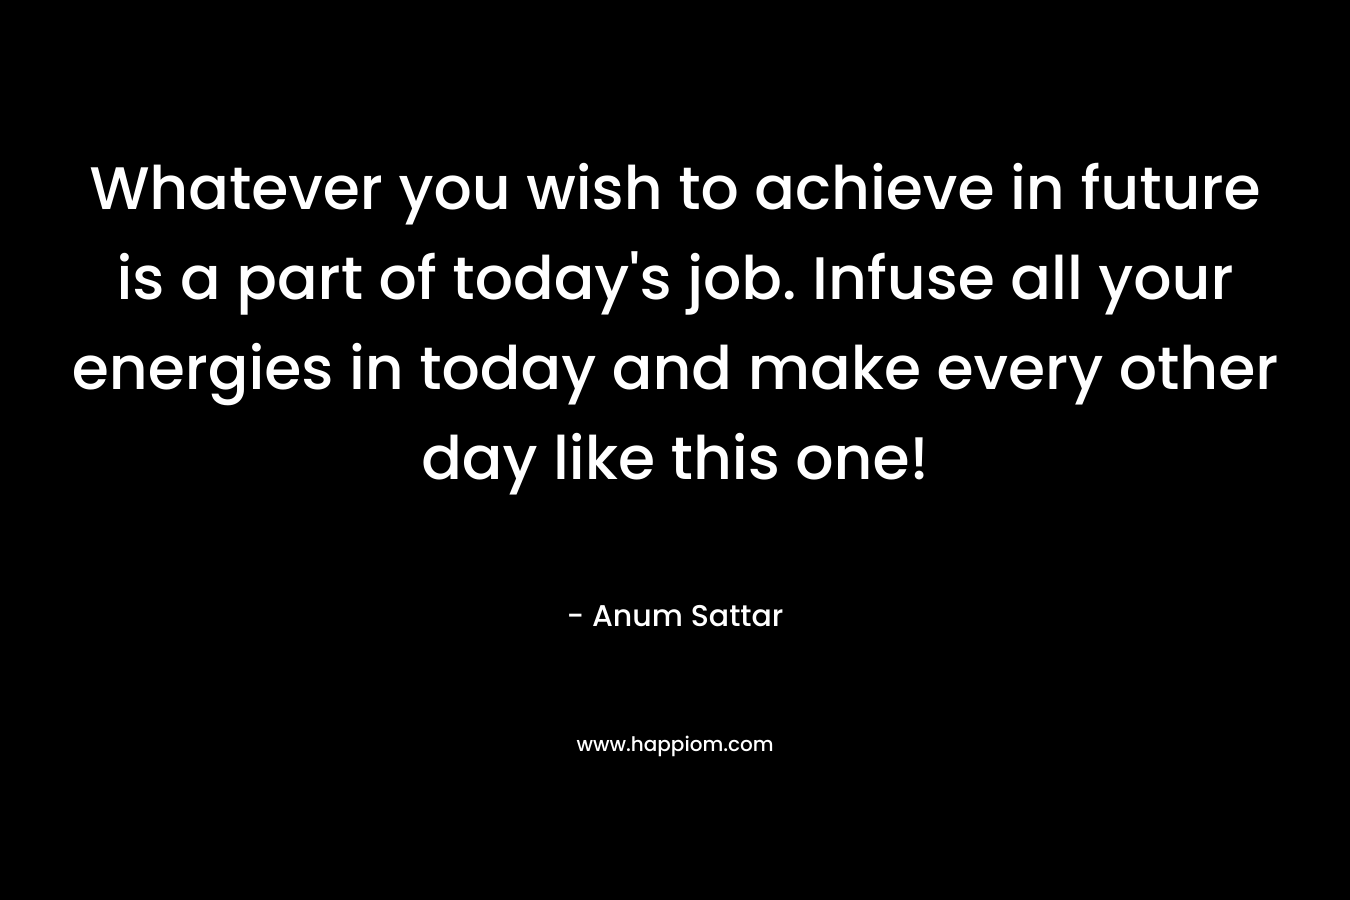 Whatever you wish to achieve in future is a part of today’s job. Infuse all your energies in today and make every other day like this one! – Anum Sattar